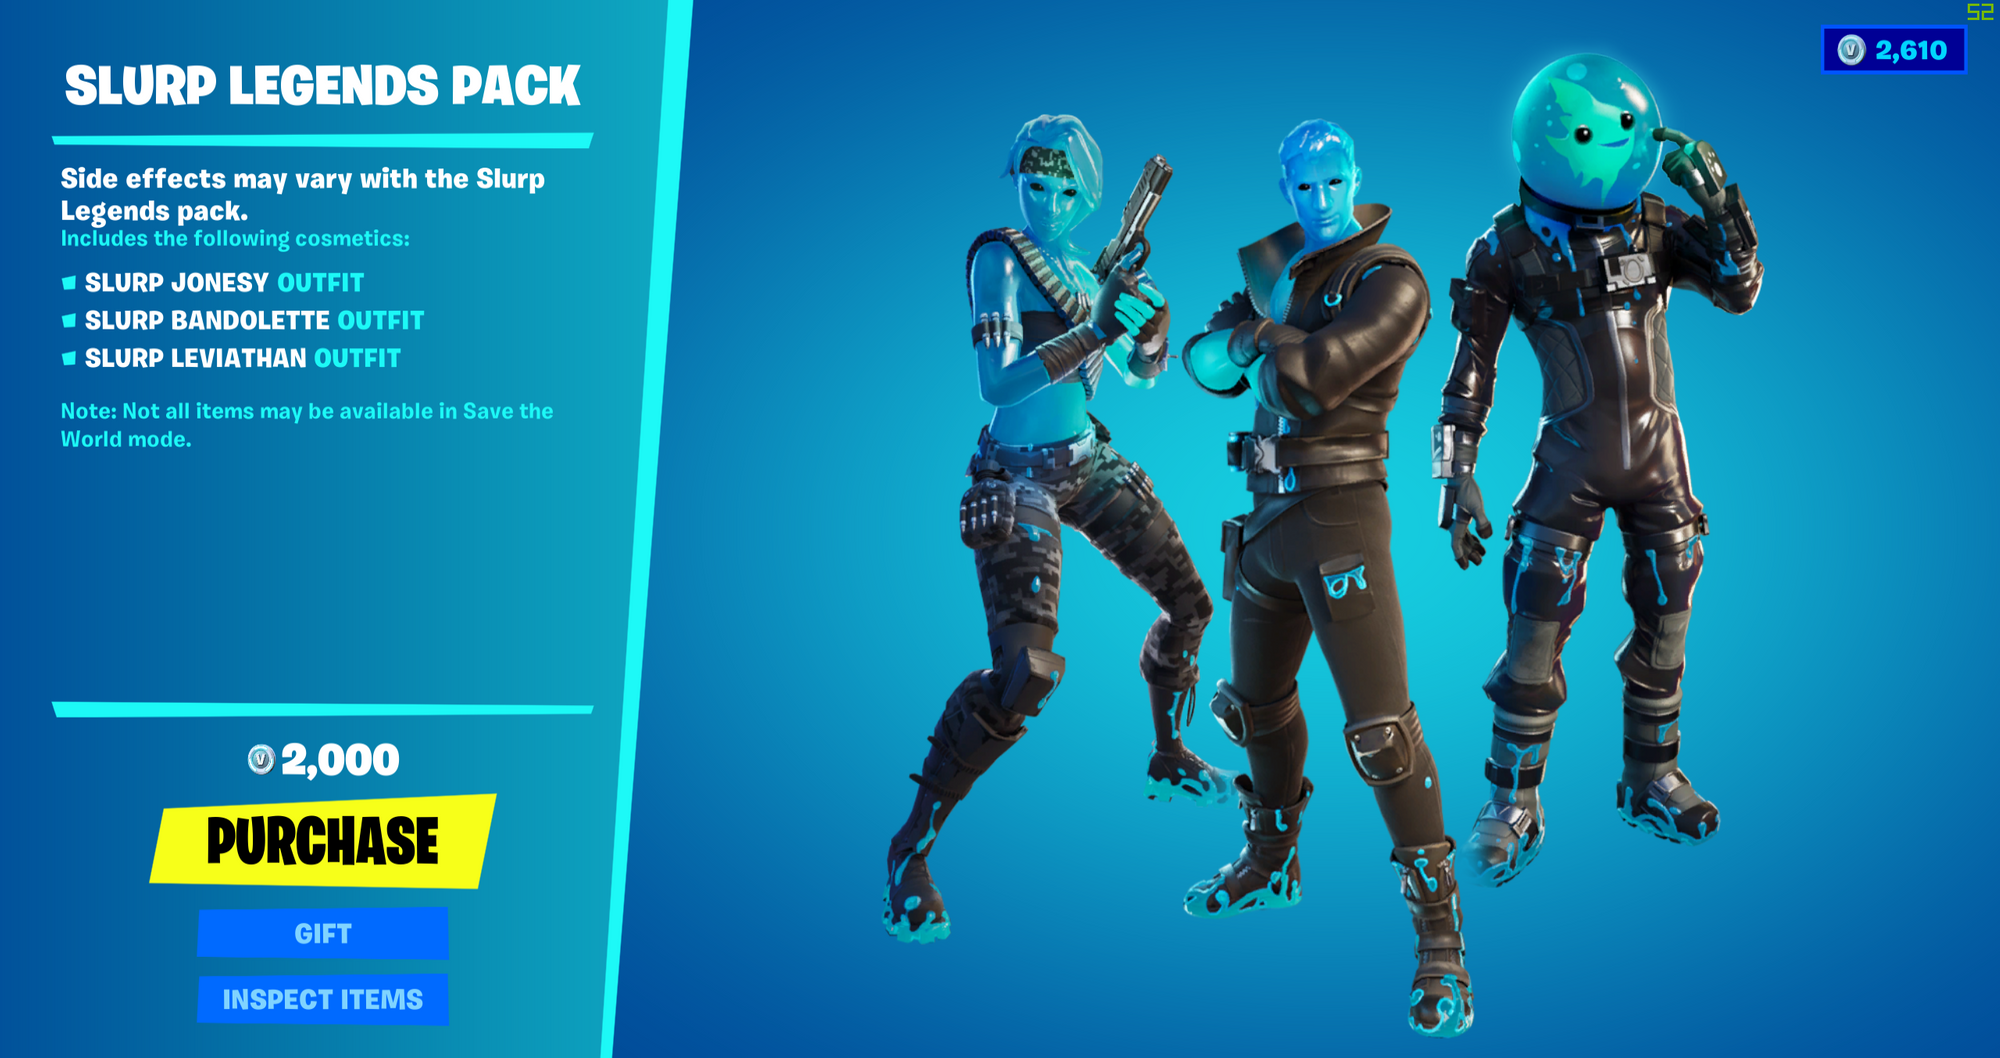 Slurp Legends Pack available in the Item Shop now